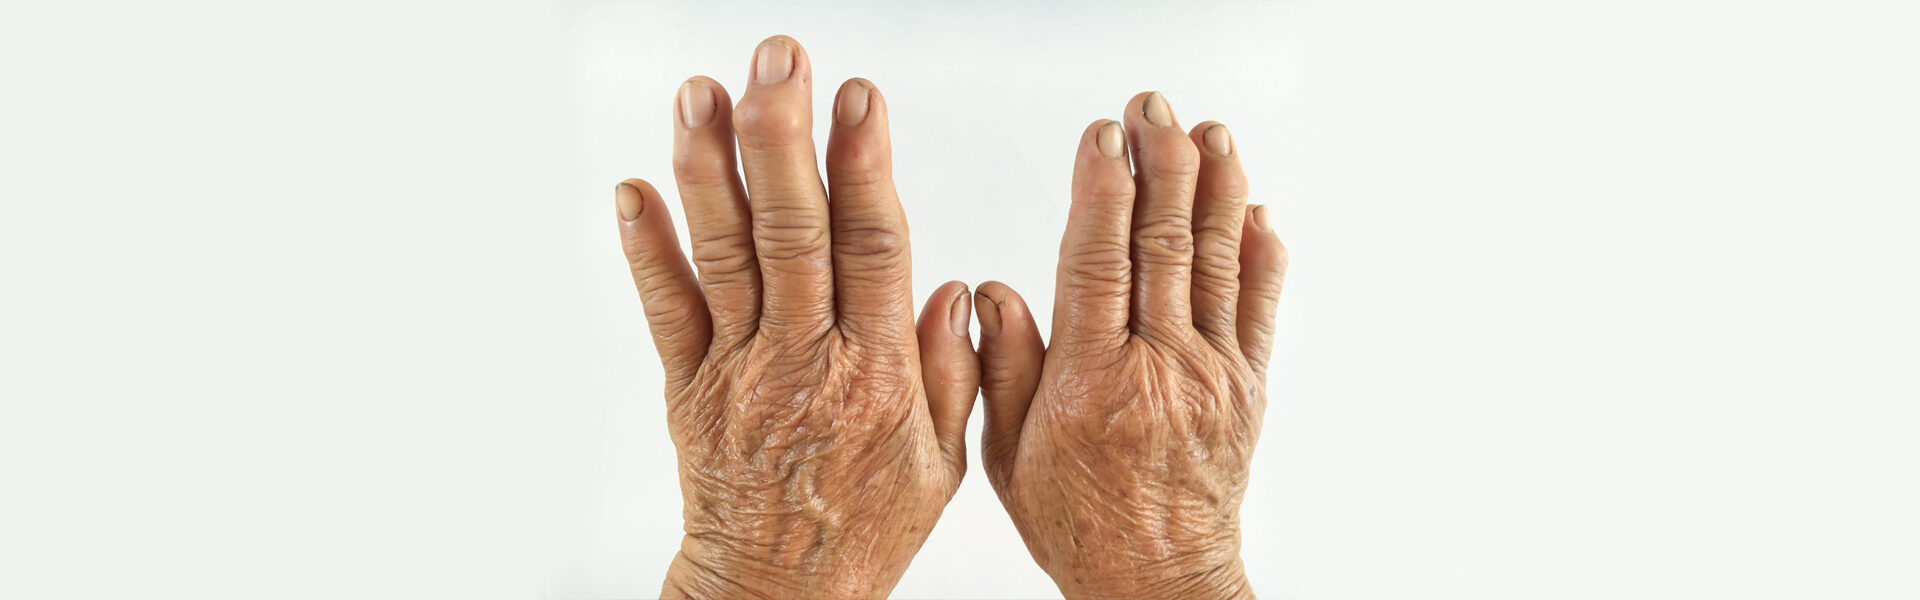 Facts You Should Know About Arthritis Diagnosis and Treatment